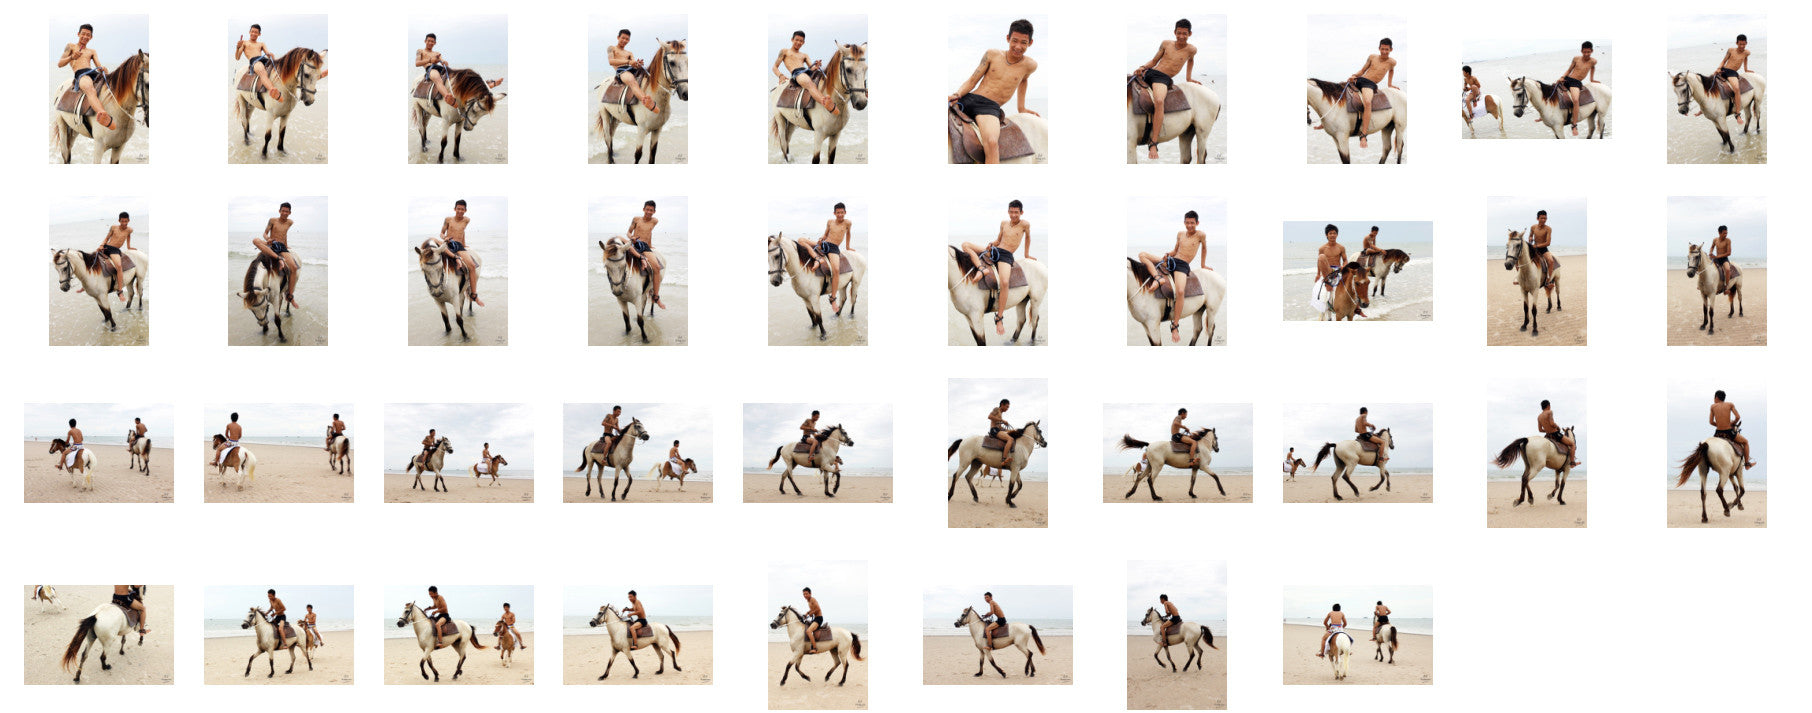 Thaksin in Black Spandex Riding with Saddle on Buckskin Horse, Part 4 - Riding.Vision